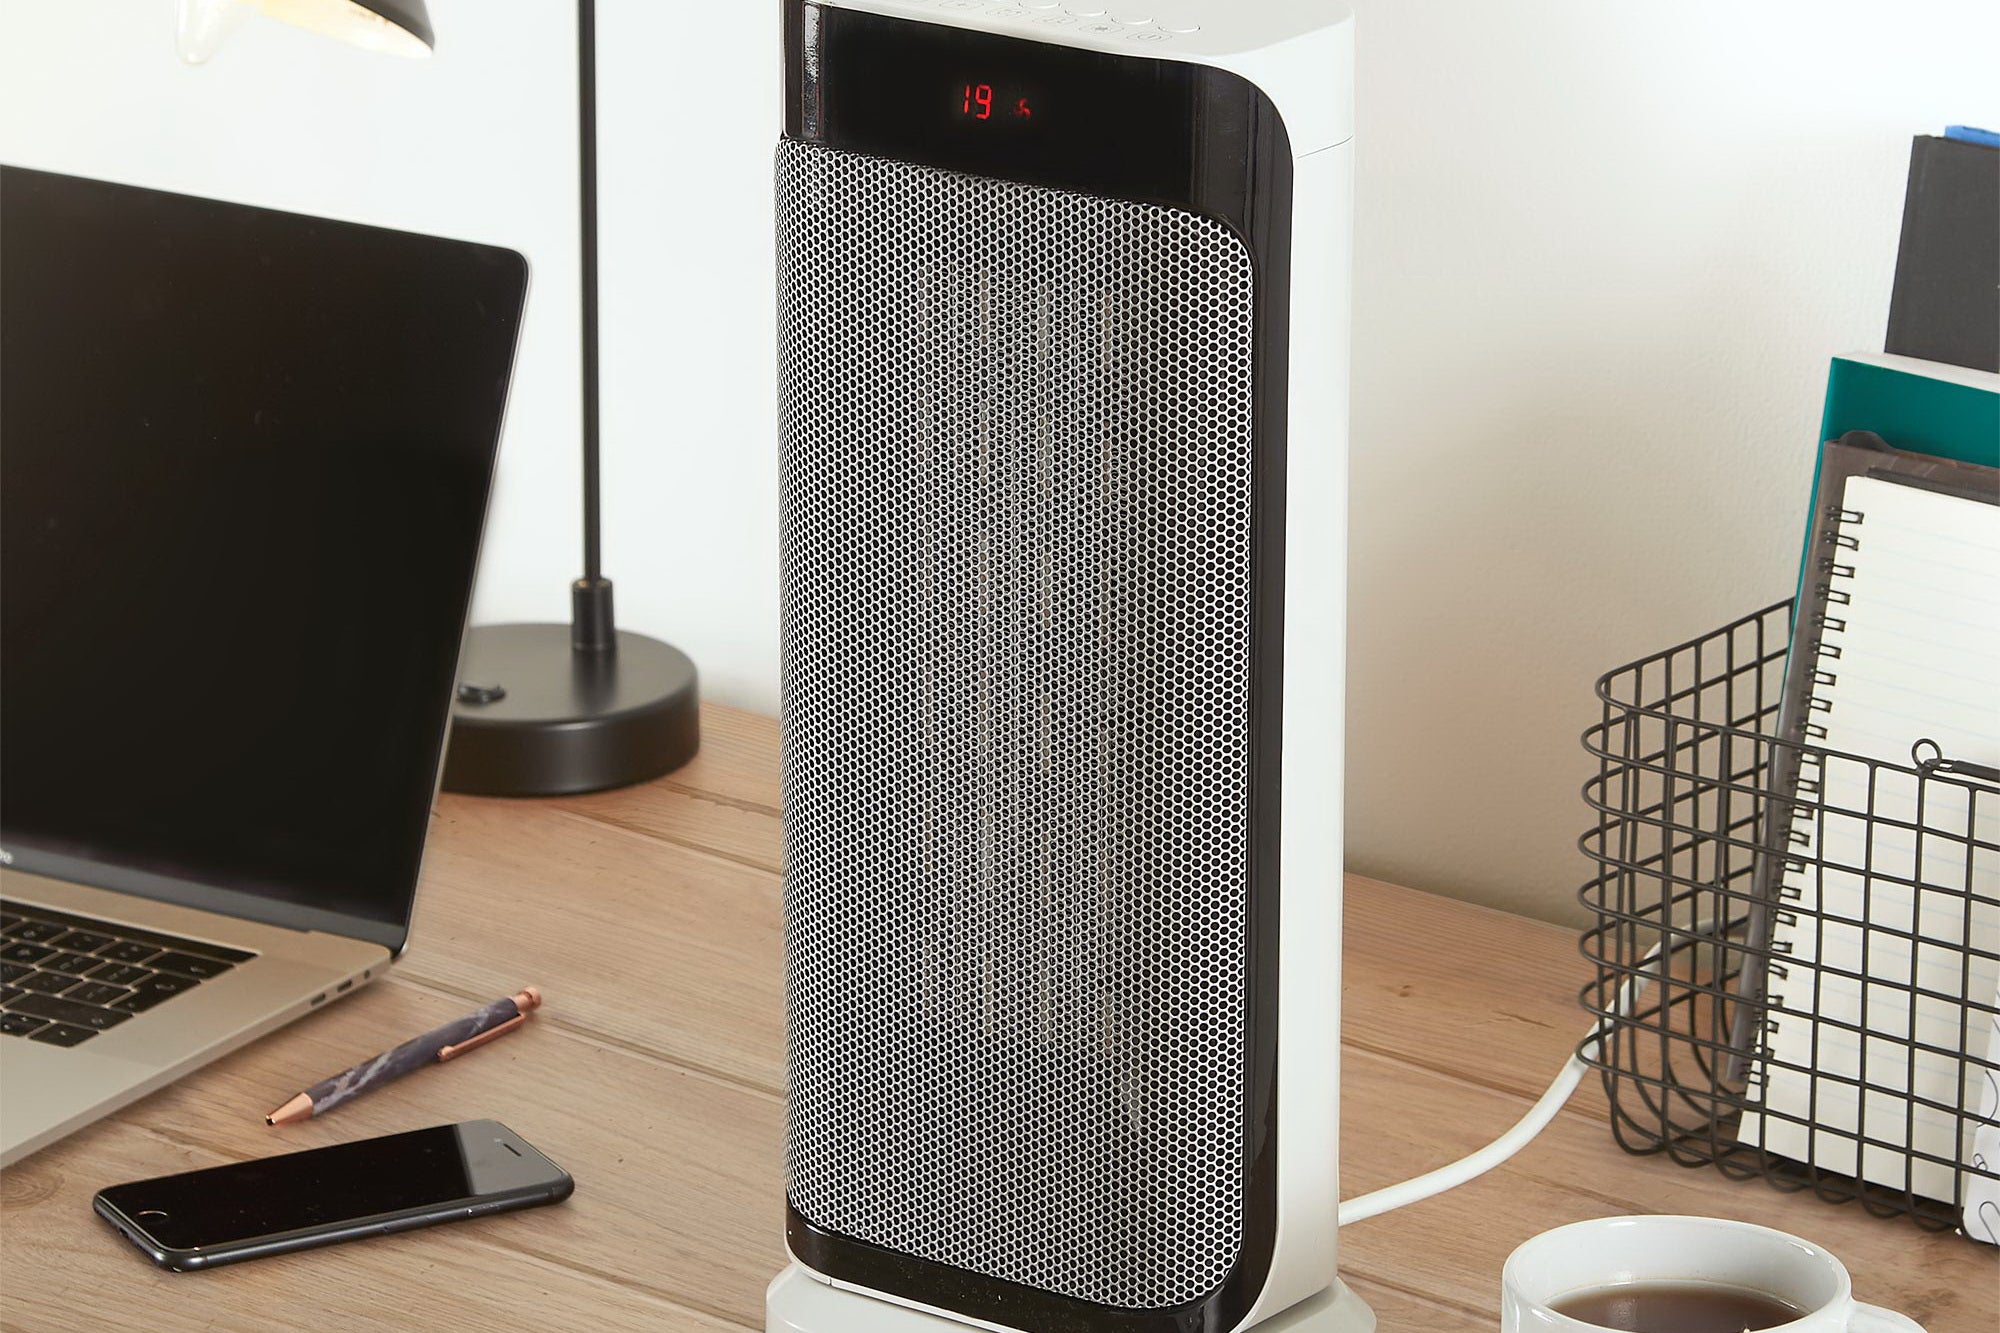 A gray-black and white VonHaus fan heater standing on a table beside a laptop